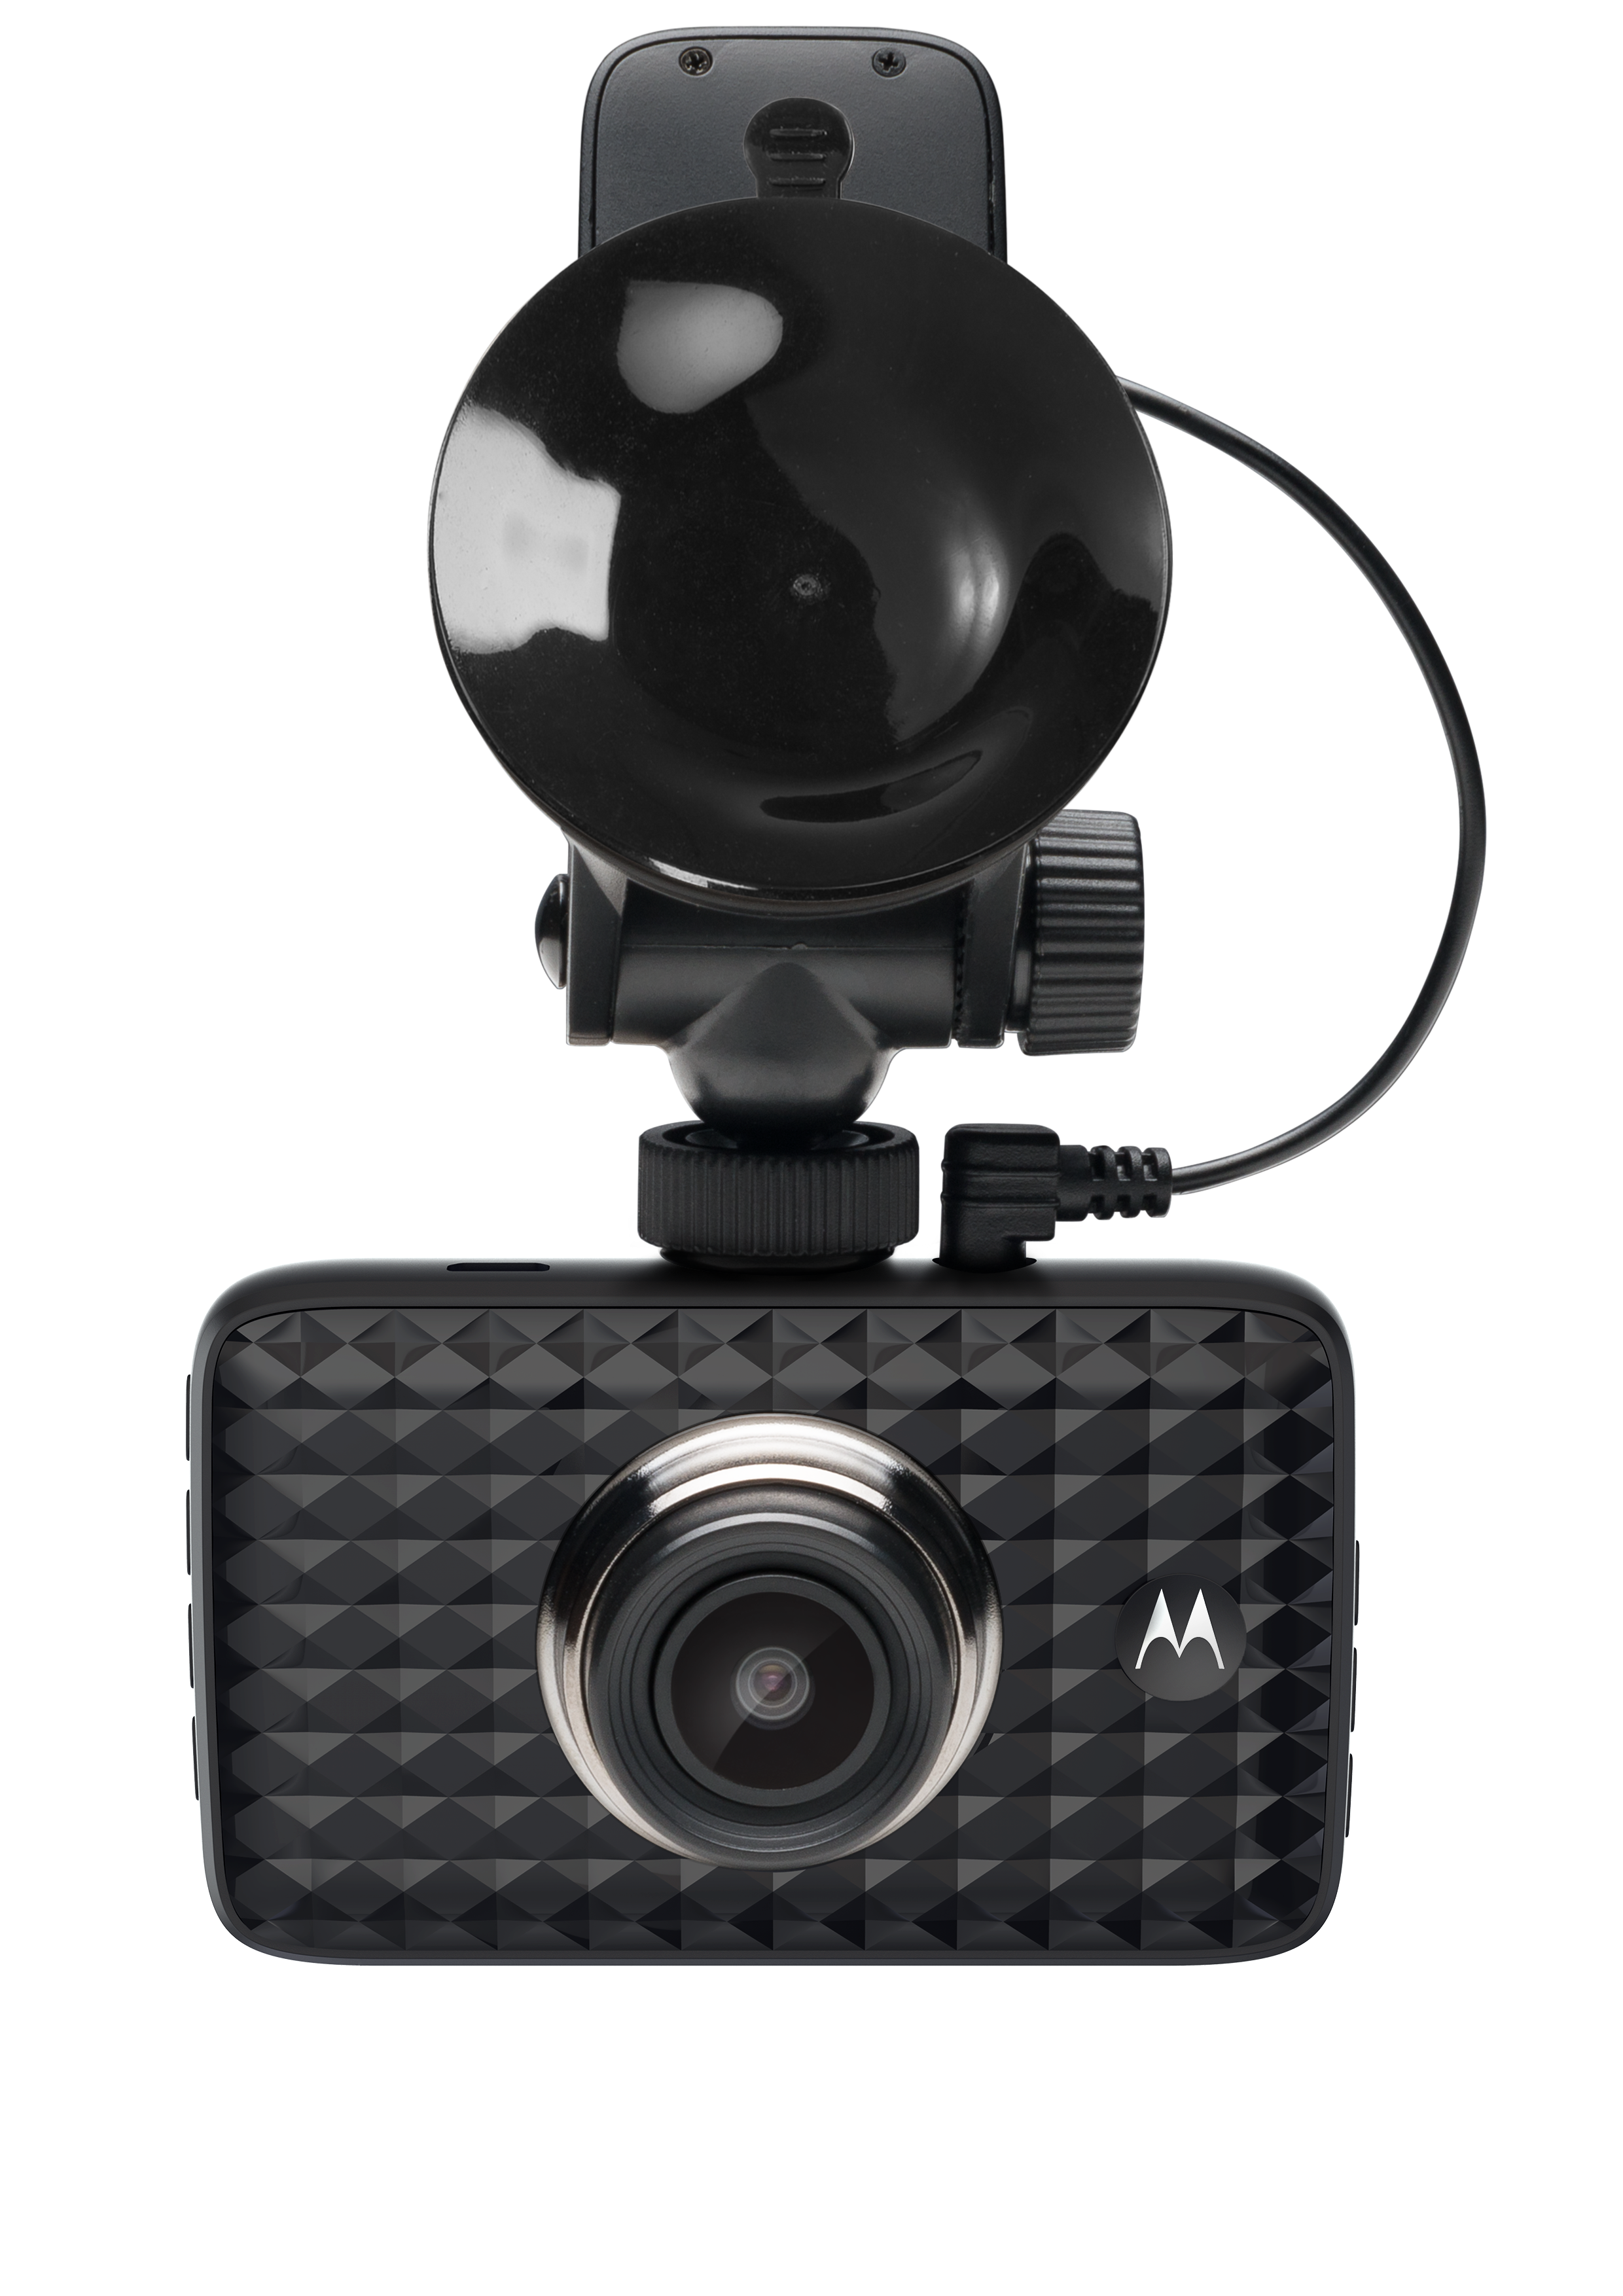 Motorola Dash Cam MDC300GW Full HD (1080p) Dash Camera with GPS and WiFi mount for window and front camera